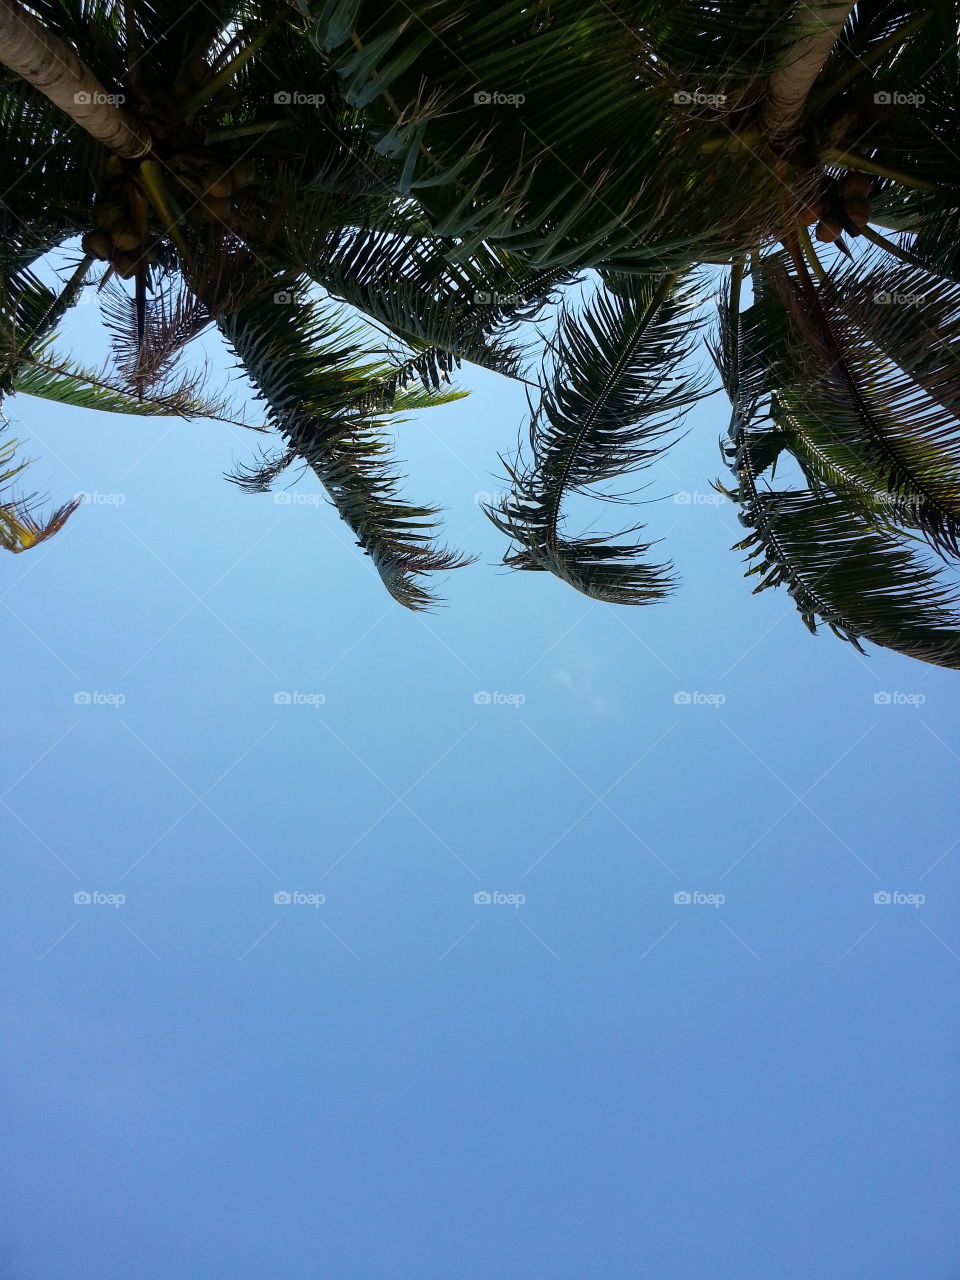 boracay getaway. the blue skies & winds of boracay as the coconut leaves dance with it